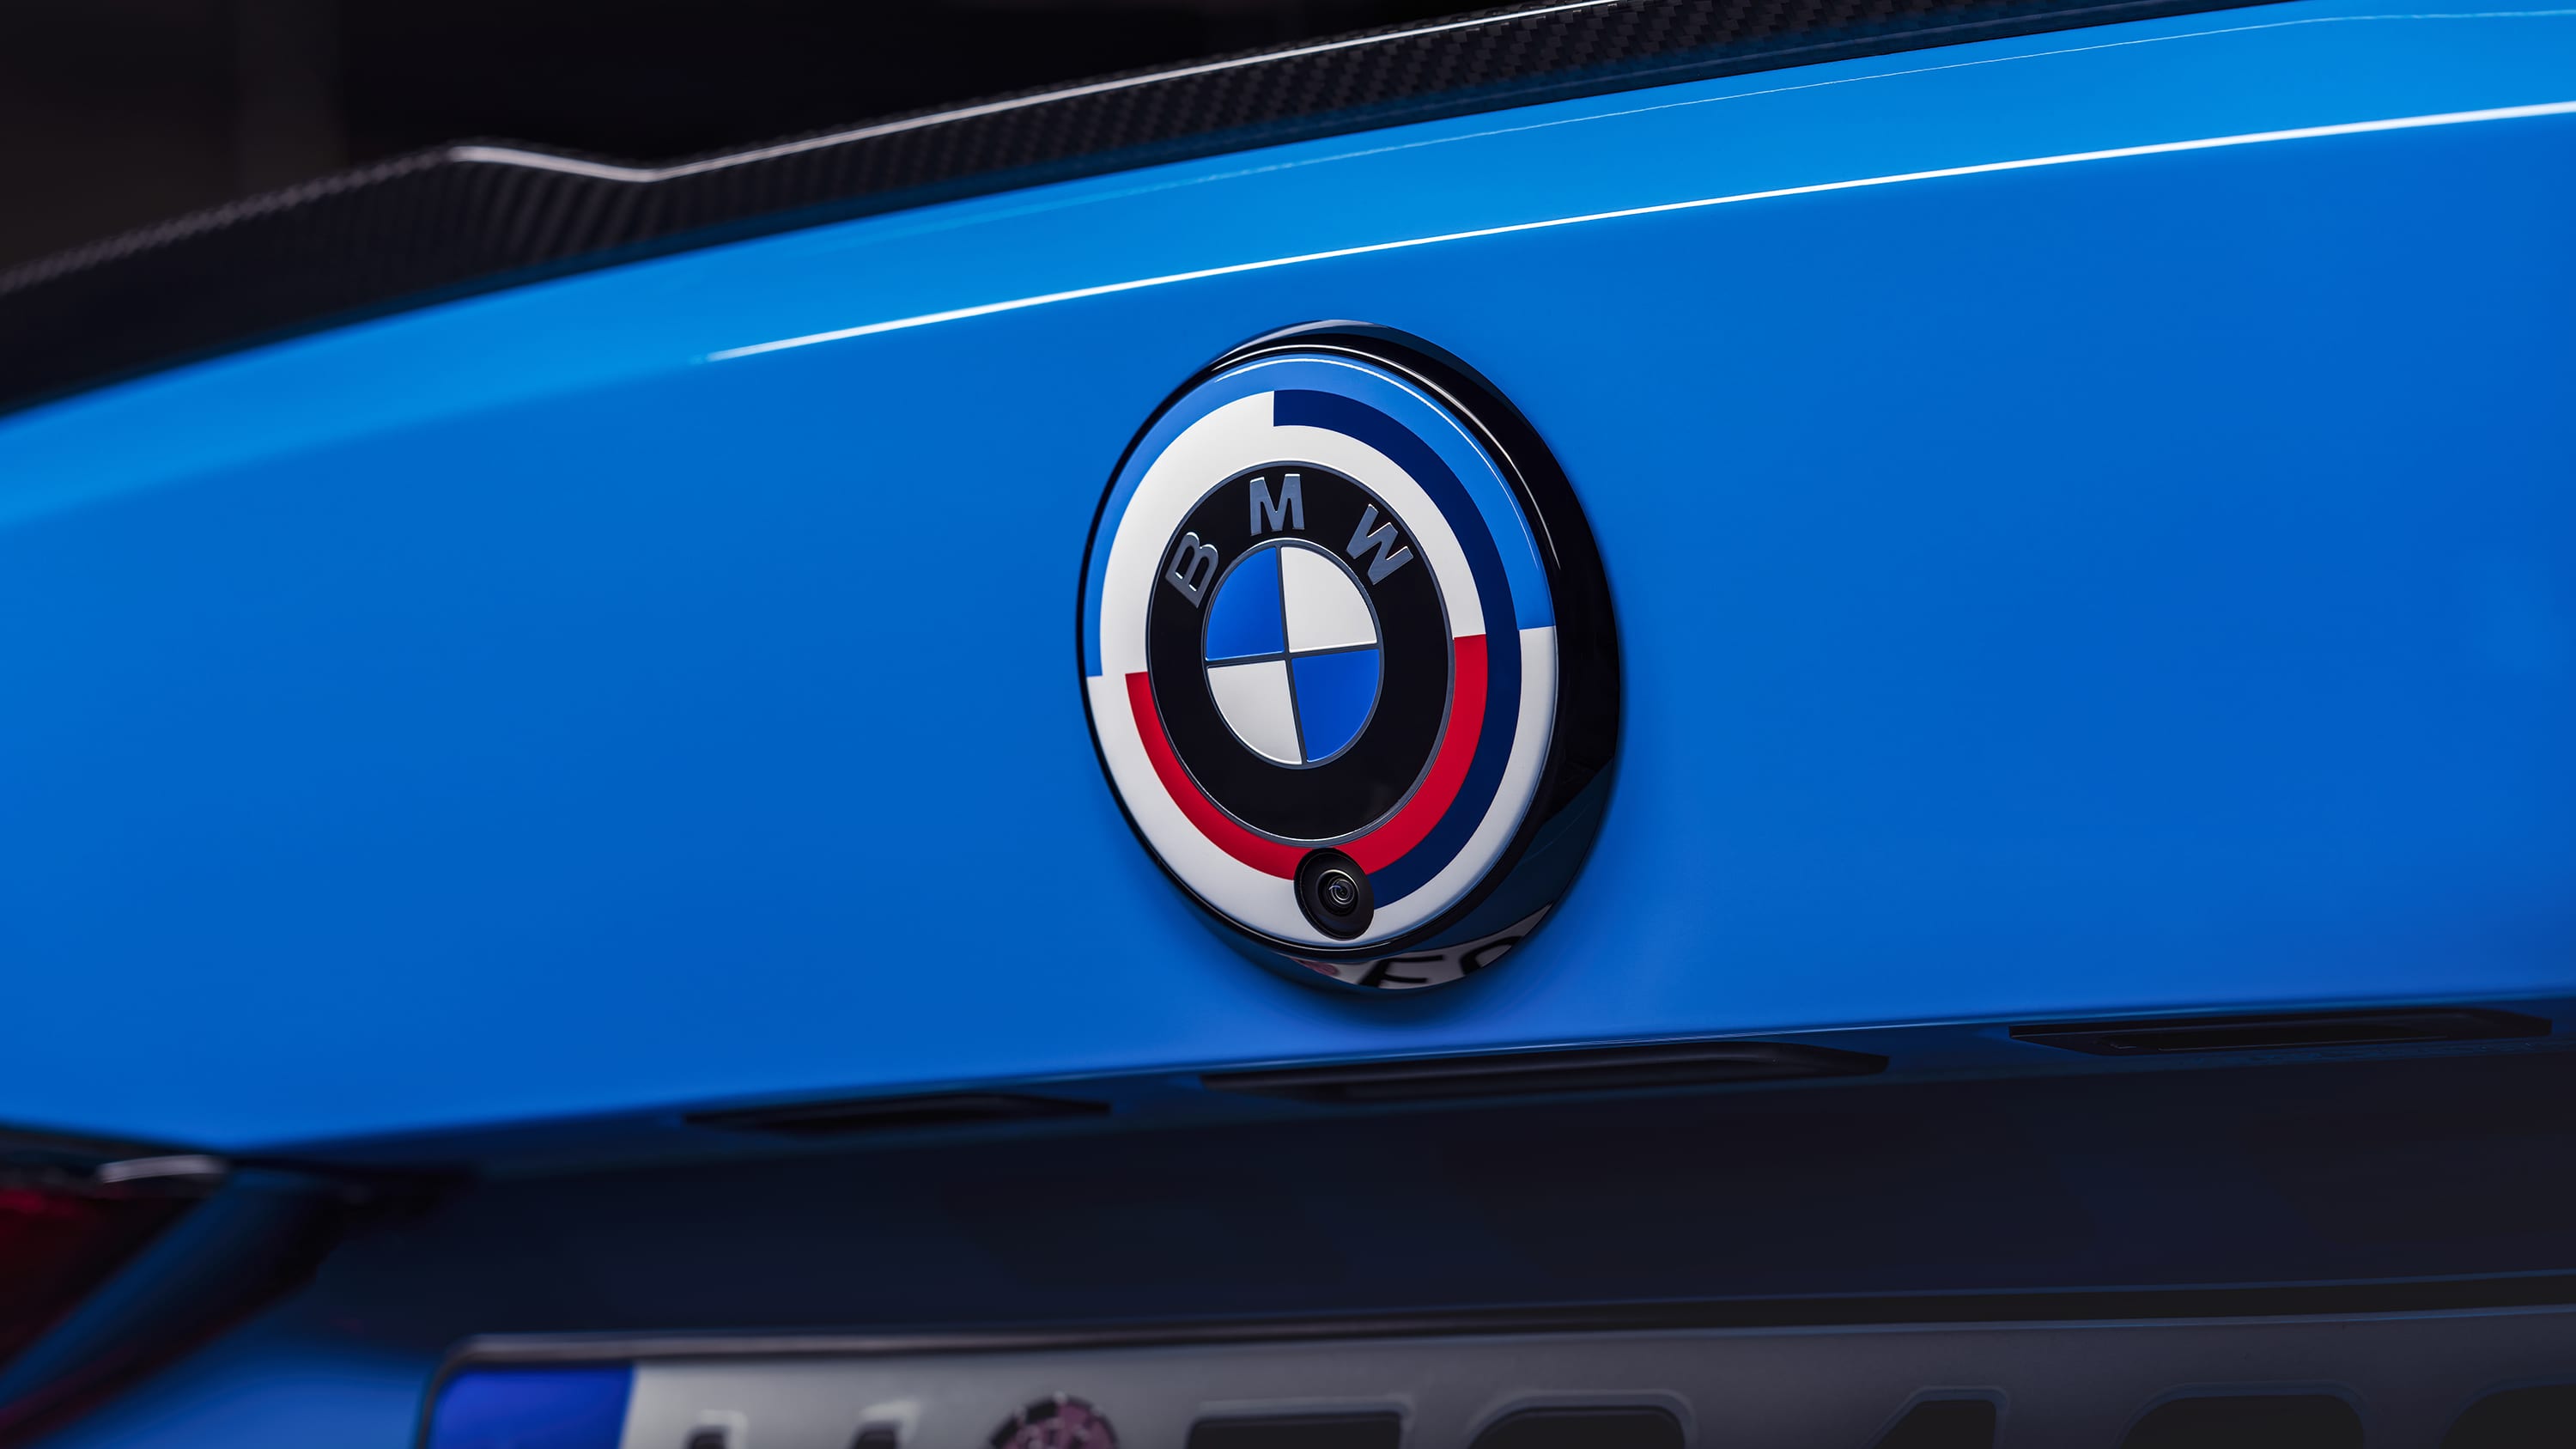 BMW M celebrate anniversary with badges, colours - Drive